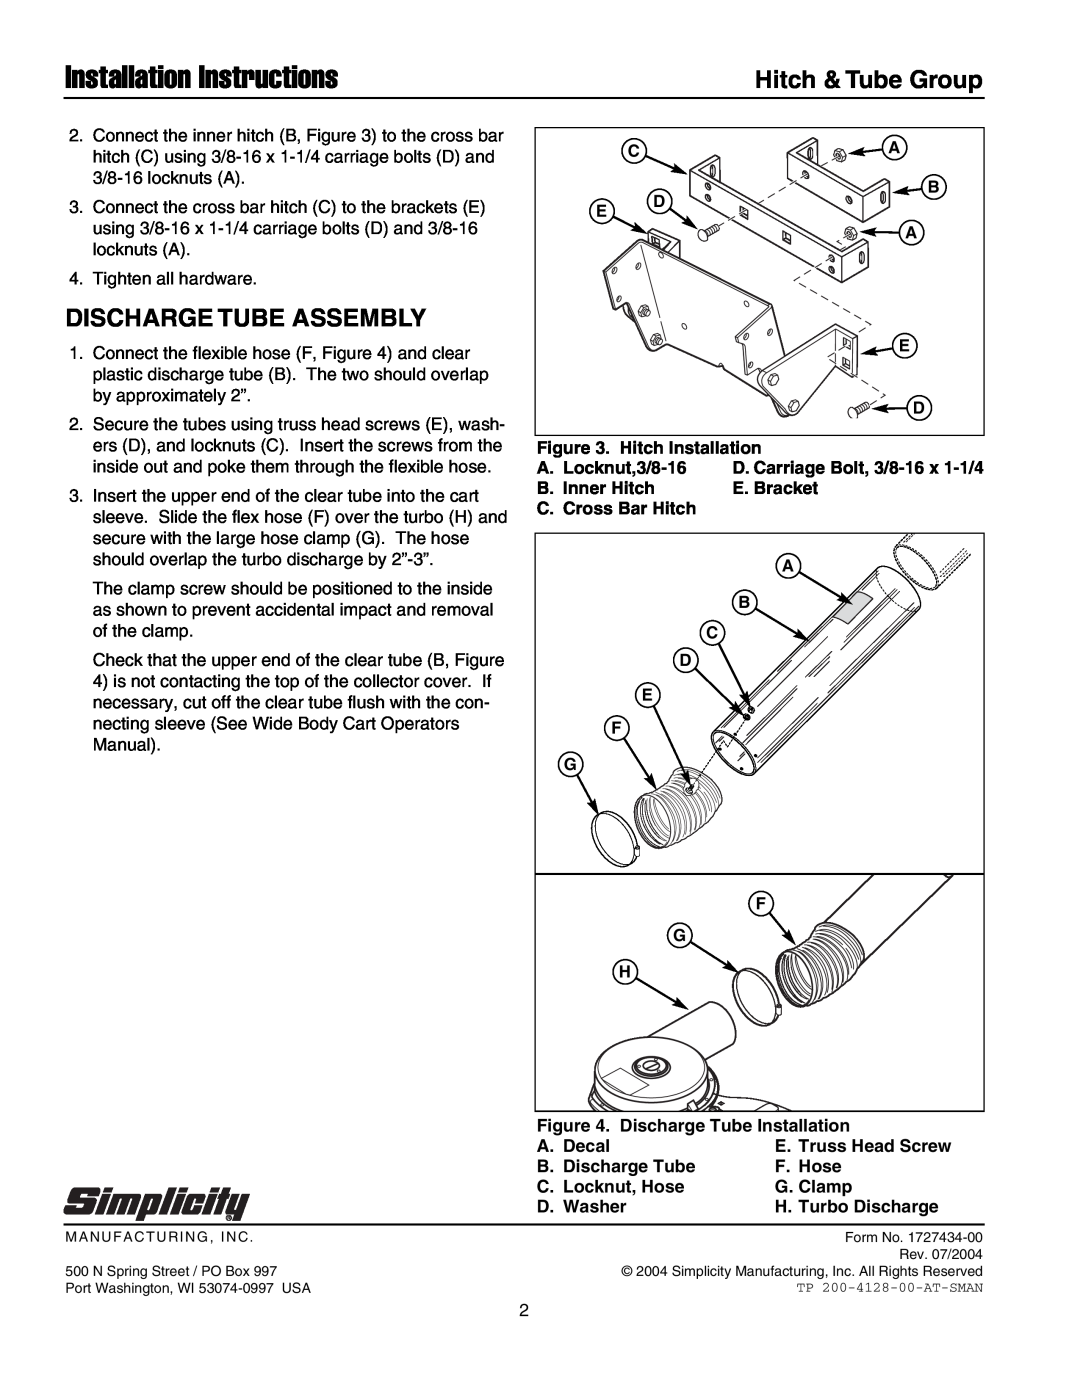 Snapper 2700, 1700 installation instructions Discharge Tube Assembly, Installation Instructions, Hitch & Tube Group 